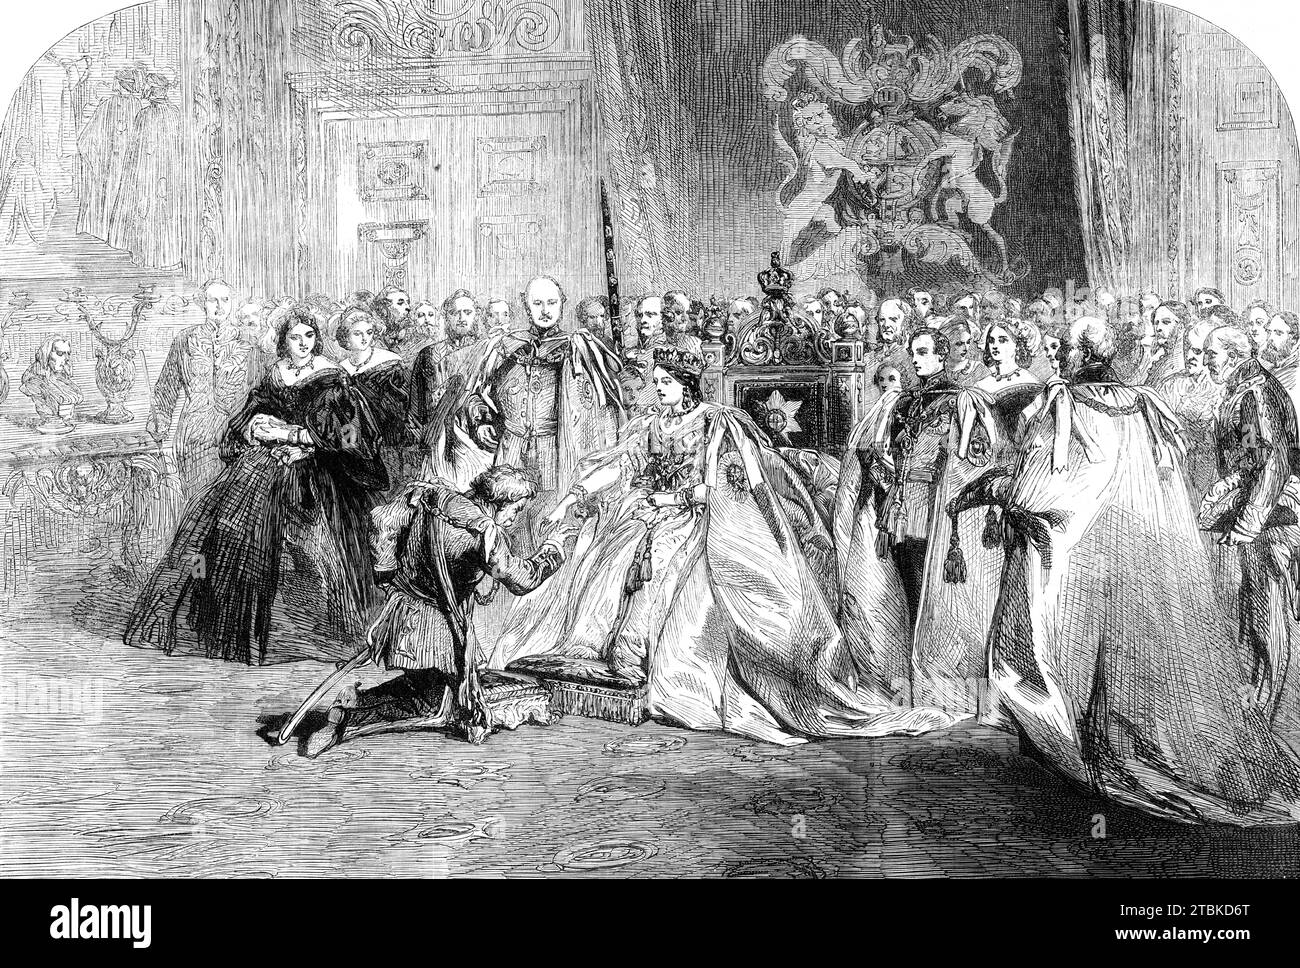 The First Investiture by Her Majesty of the Most Exalted Order of the Star of India in the Throne-Room, Windsor Castle, 1861. '...Princesses Alice, Helena, Louise, and Beatrice, Princes Arthur and Leopold, and the Princess of Hohenlohe, witnessed the ceremony...the Prince Consort and Prince of Wales having been first nominated extra knights, the following were then invested: Viscount Gough, Lord Harris, the Maharajah Dhuleep Singh, Lord Clyde, Sir John Lawrence, and Sir George Pollock...the Queen wore the mantle, which is of light blue satin, lined with white satin, and fastened with a cordon Stock Photo